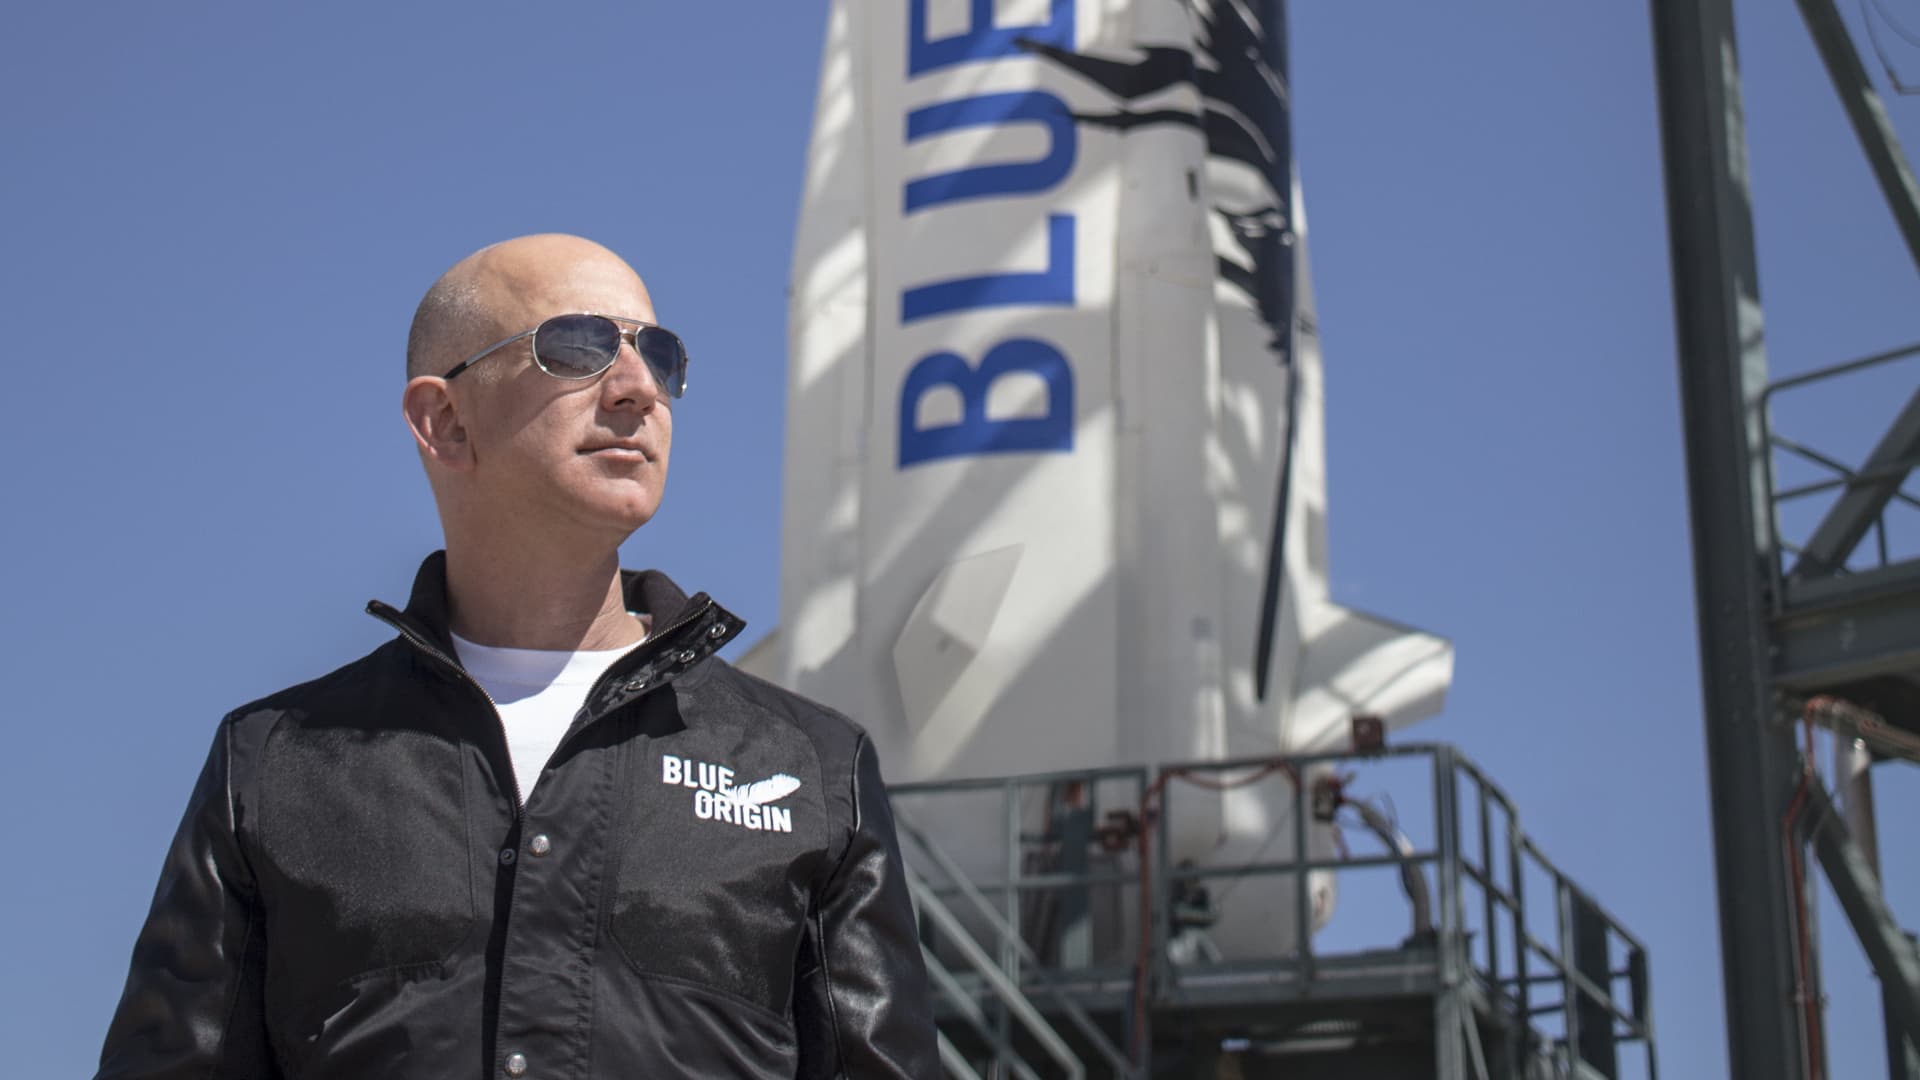 Jeff Bezos, founder of Blue Origin, is developing the New Shepard rocket for space tourism.